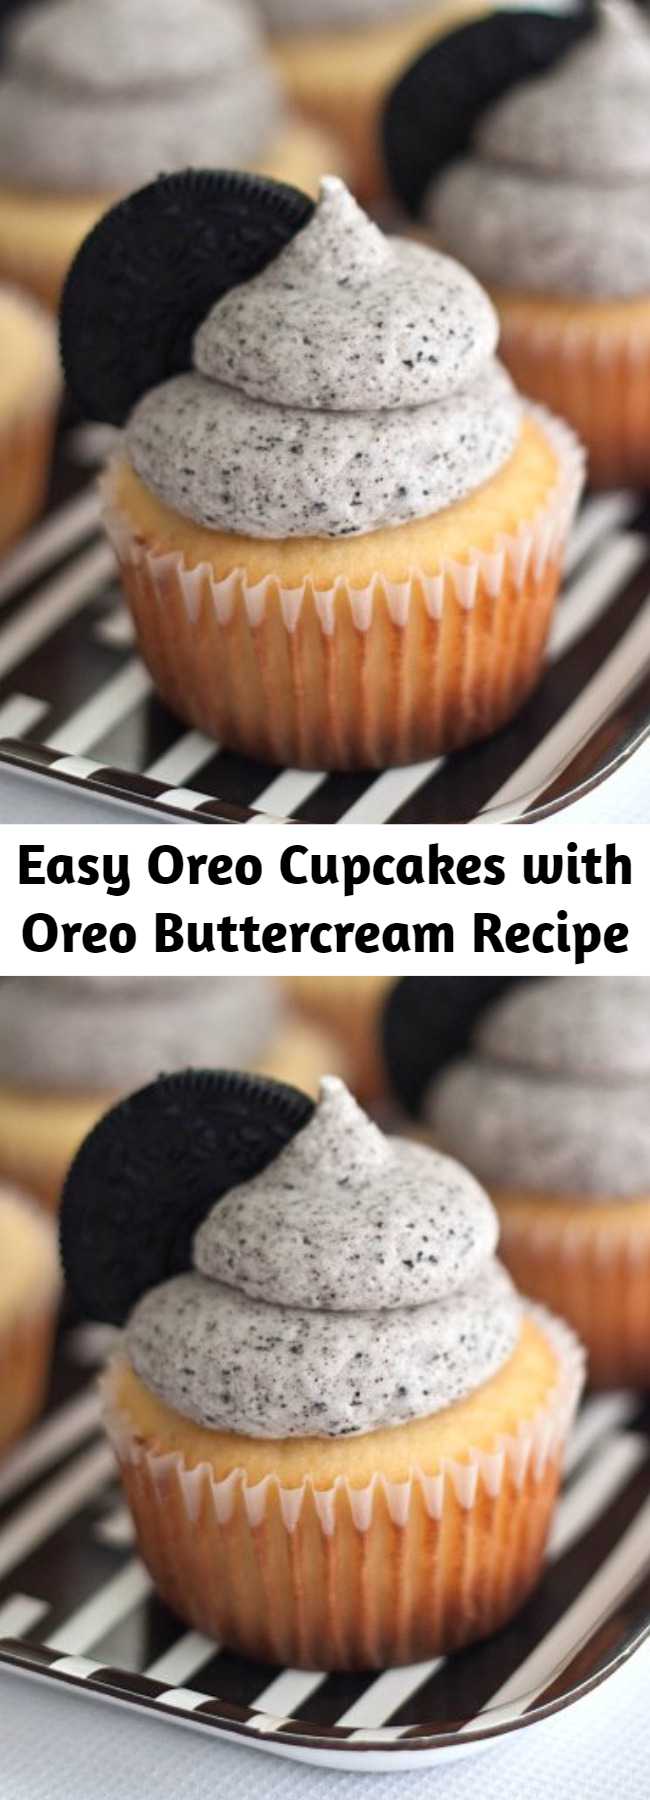 Easy Oreo Cupcakes with Oreo Buttercream Recipe - A simple vanilla cupcake with an Oreo surprise on the bottom, topped with a rich Oreo buttercream frosting. It’s pretty much perfection. If you’re looking for something fun to bake this weekend, look no further. I’m sure they’ll quickly become your favorite cupcake too!